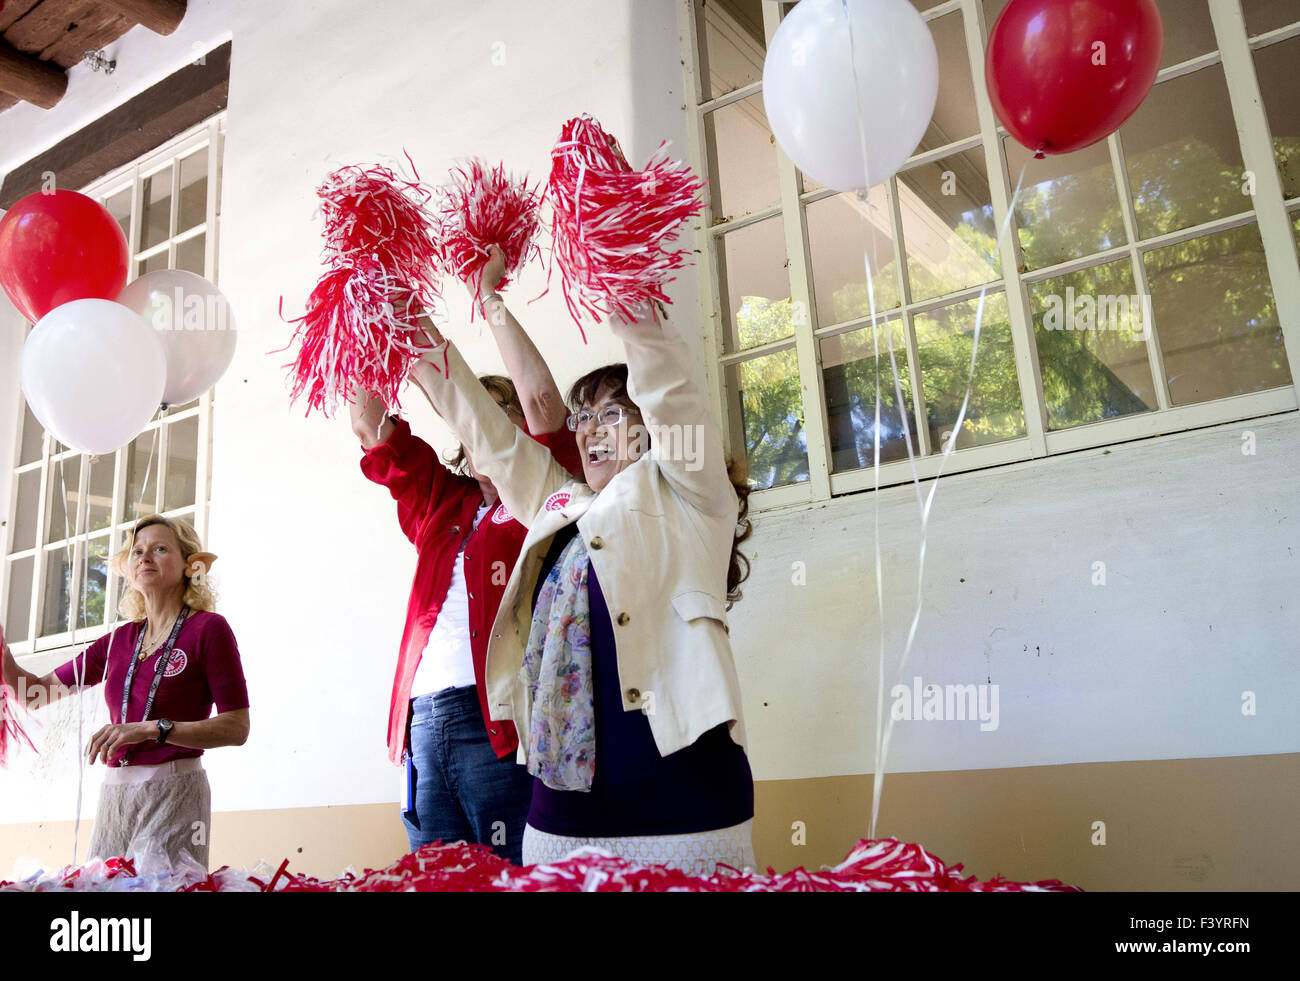 Albuquerque, NM, USA. 13th Oct, 2015. 101315.Gina Urias-Sandoval, right, staff counselor and director of the Executive MBA program at the University of New Mexico, cheers with Katherine Turner, second from right, a UNM staff council representative and a UNM alumni, during the Staff Council's annual homecoming luncheon in the Dominguez Plaza at UNM, Tuesday, Oct. 13, 2015, in Albuquerque, N.M. ''Everyone's a Lobo. Woof, woof, woof. Go staff, '' cheered Urias-Sandoval and Turner while handing out pompoms and cookies. Lobo will take on Hawaii Rainbow Warriors in Saturday's Homecoming game. (Cred Stock Photo